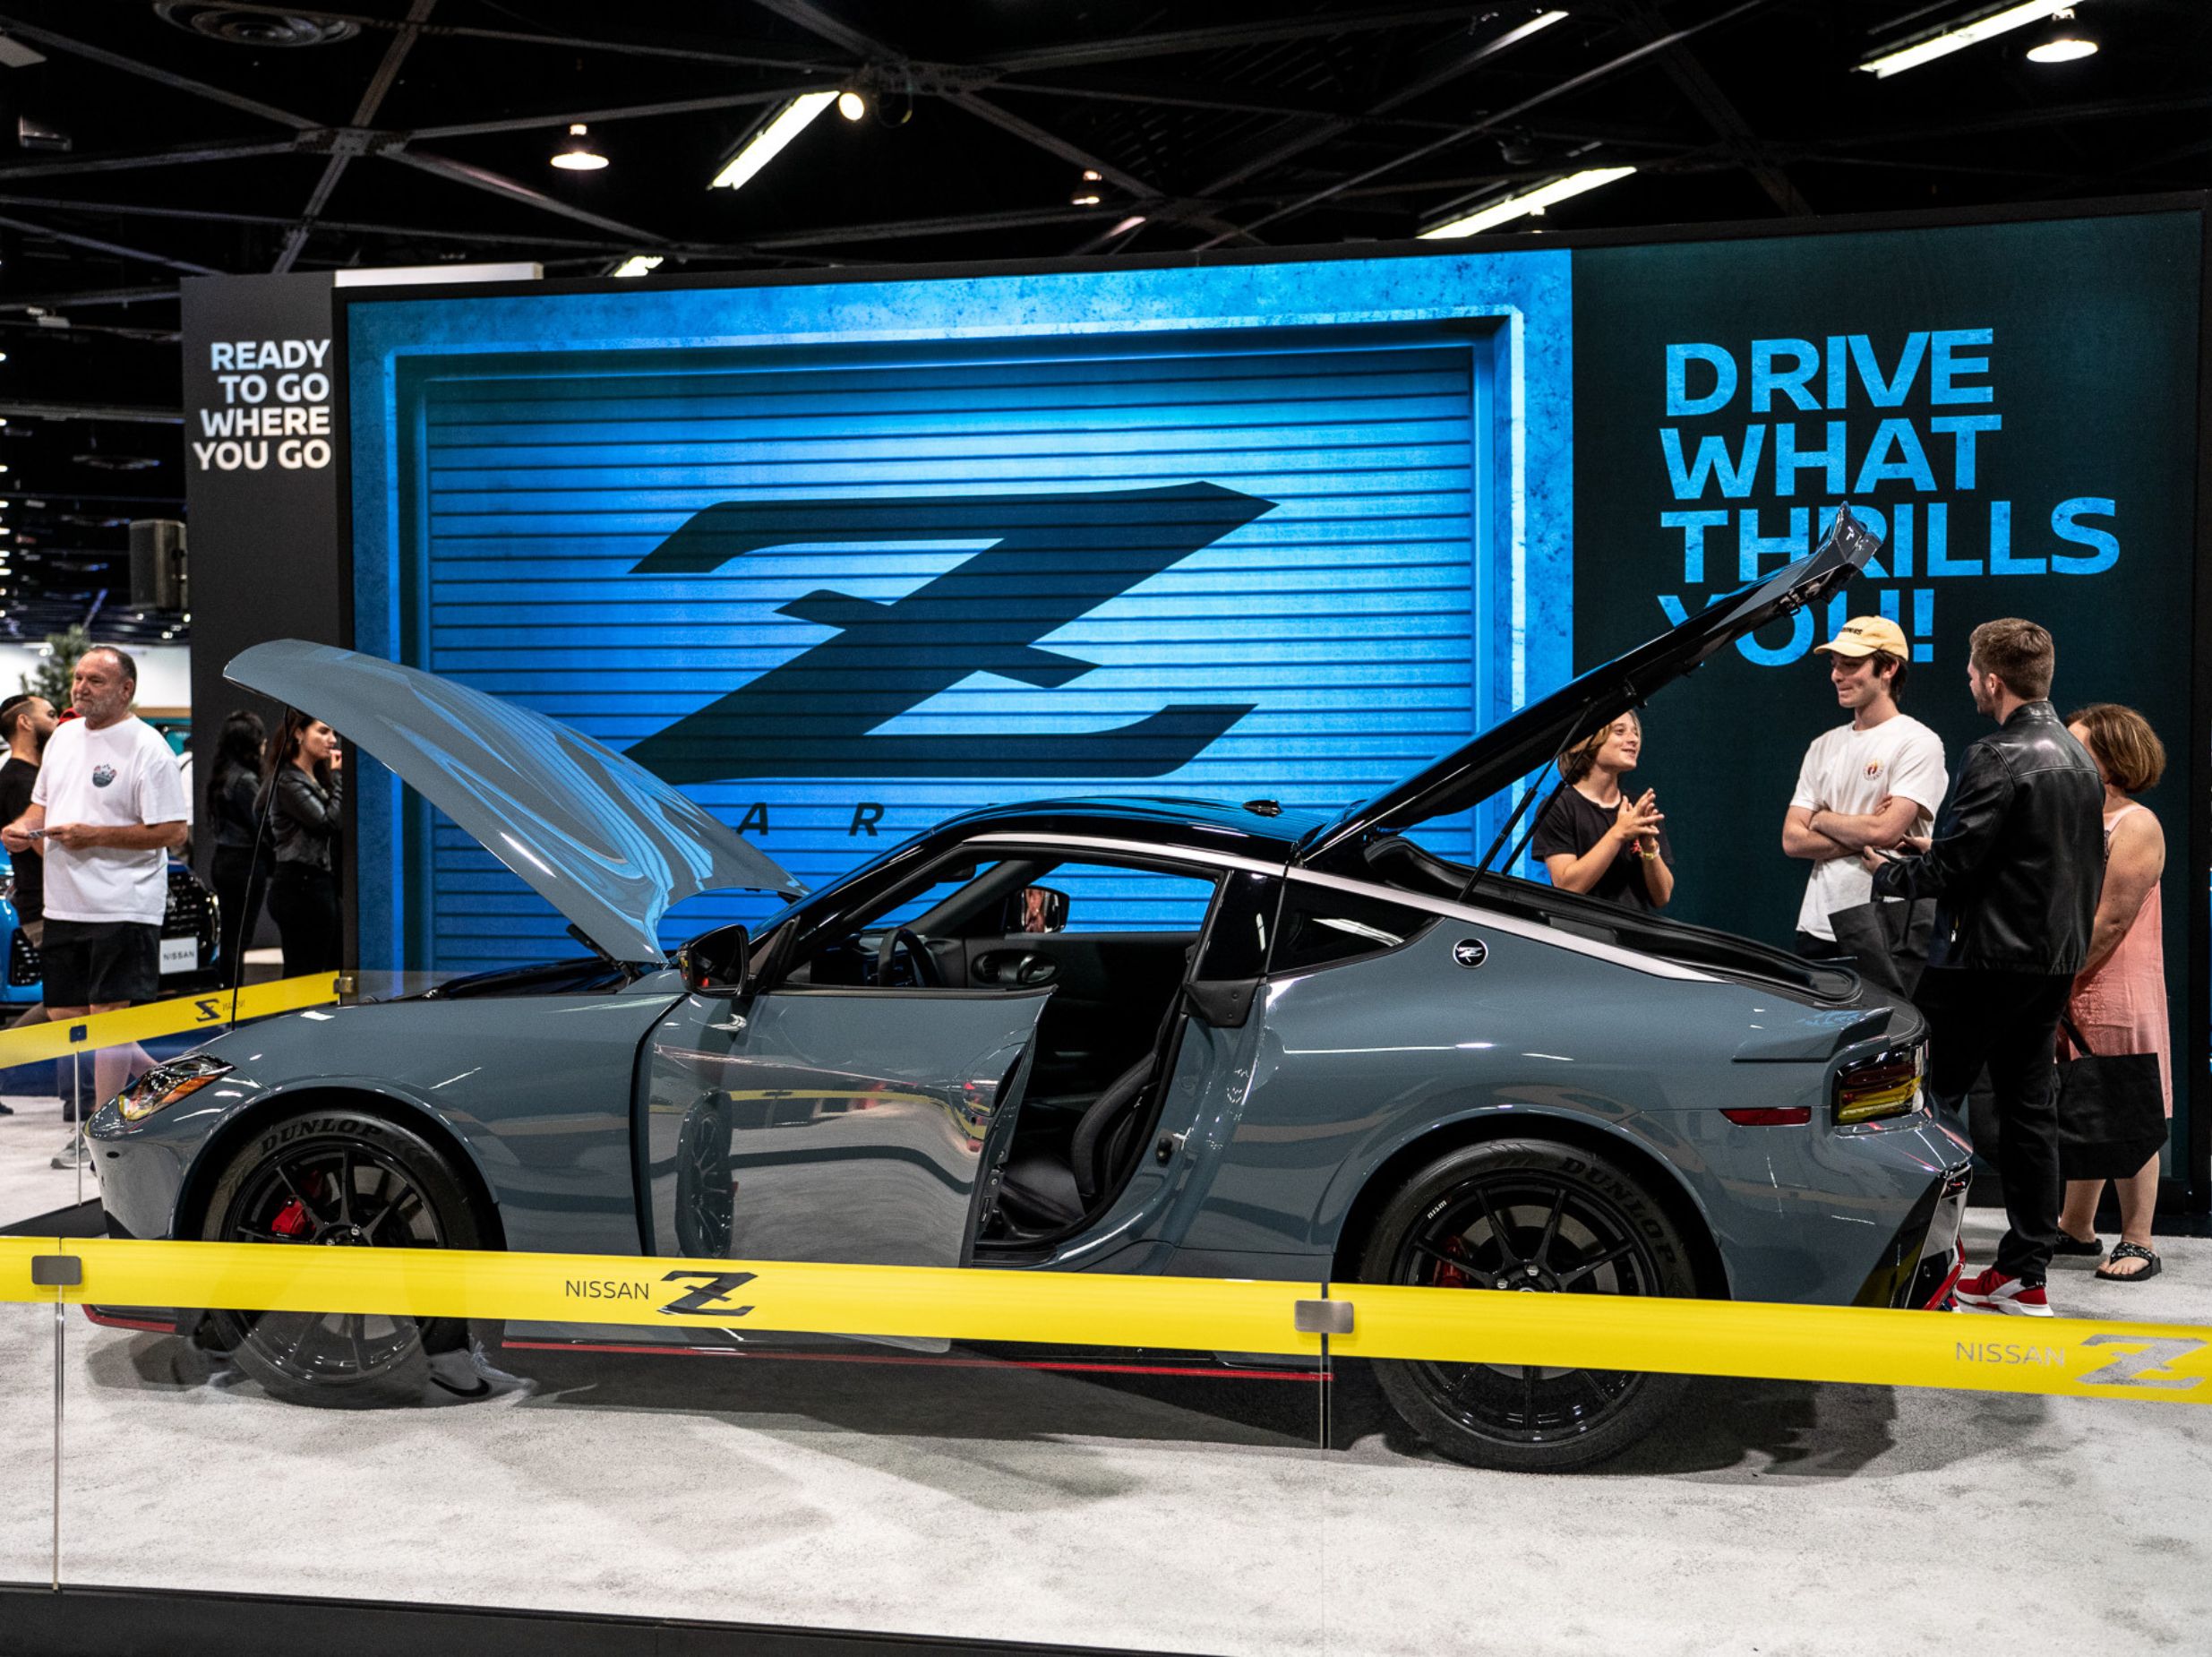 Utah Auto Expo brings the newest cars, trucks, & EVs to Sandy this weekend!